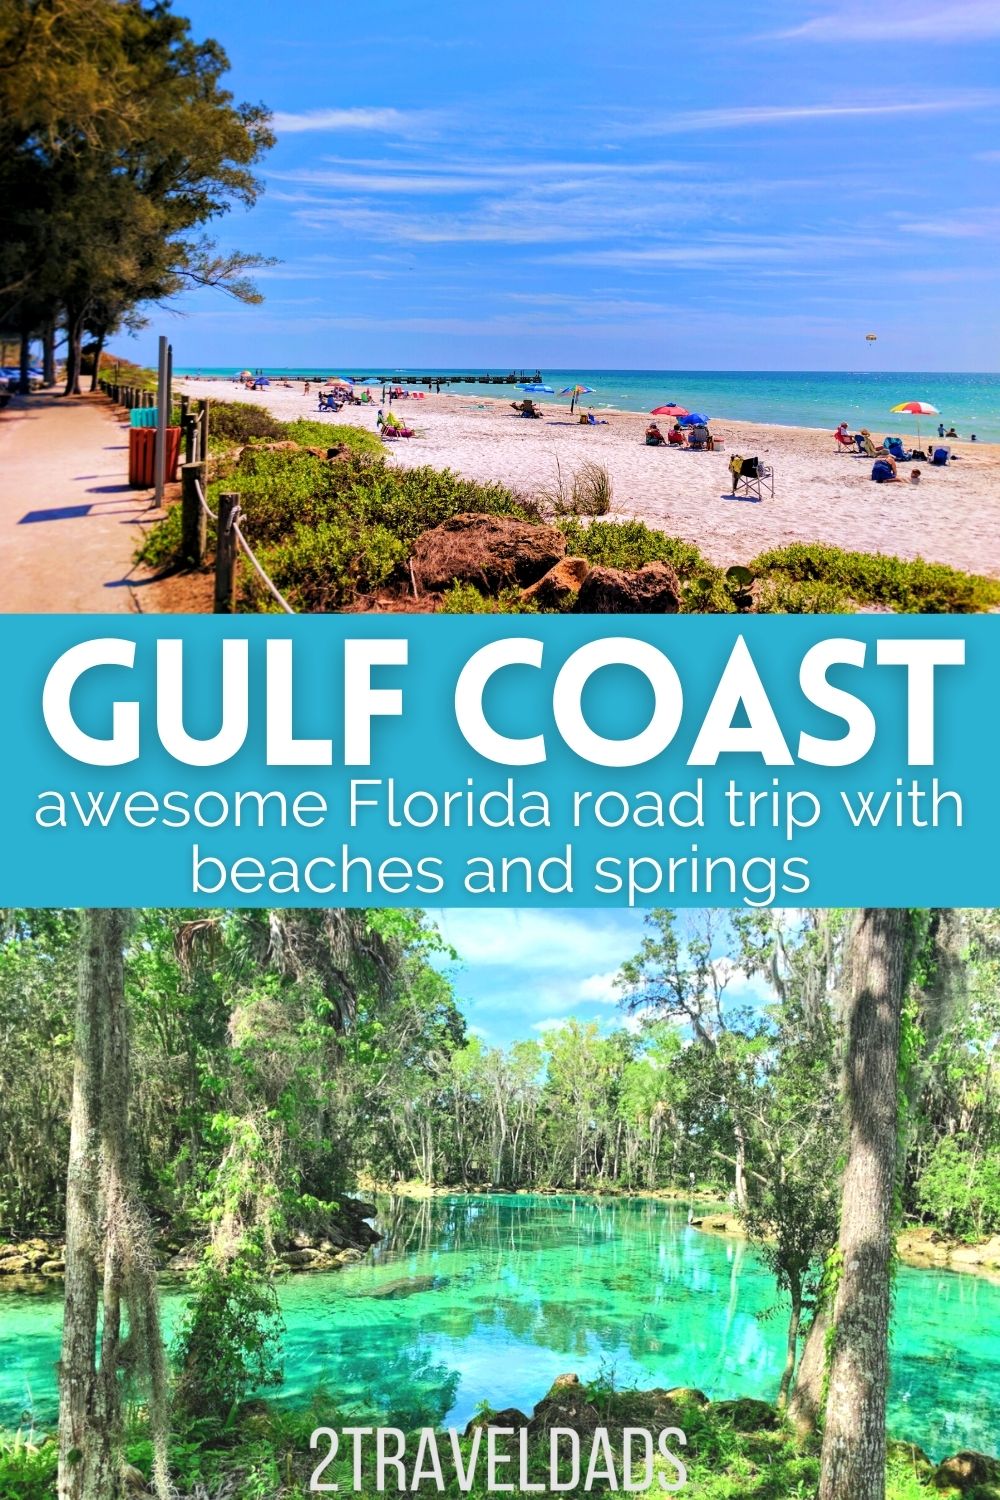 This Florida Gulf Coast road trip plan is perfect for enjoying beautiful beaches, freshwater springs and Florida's National Parks. From Miami to Crystal River, this 6 day itinerary is all you need.